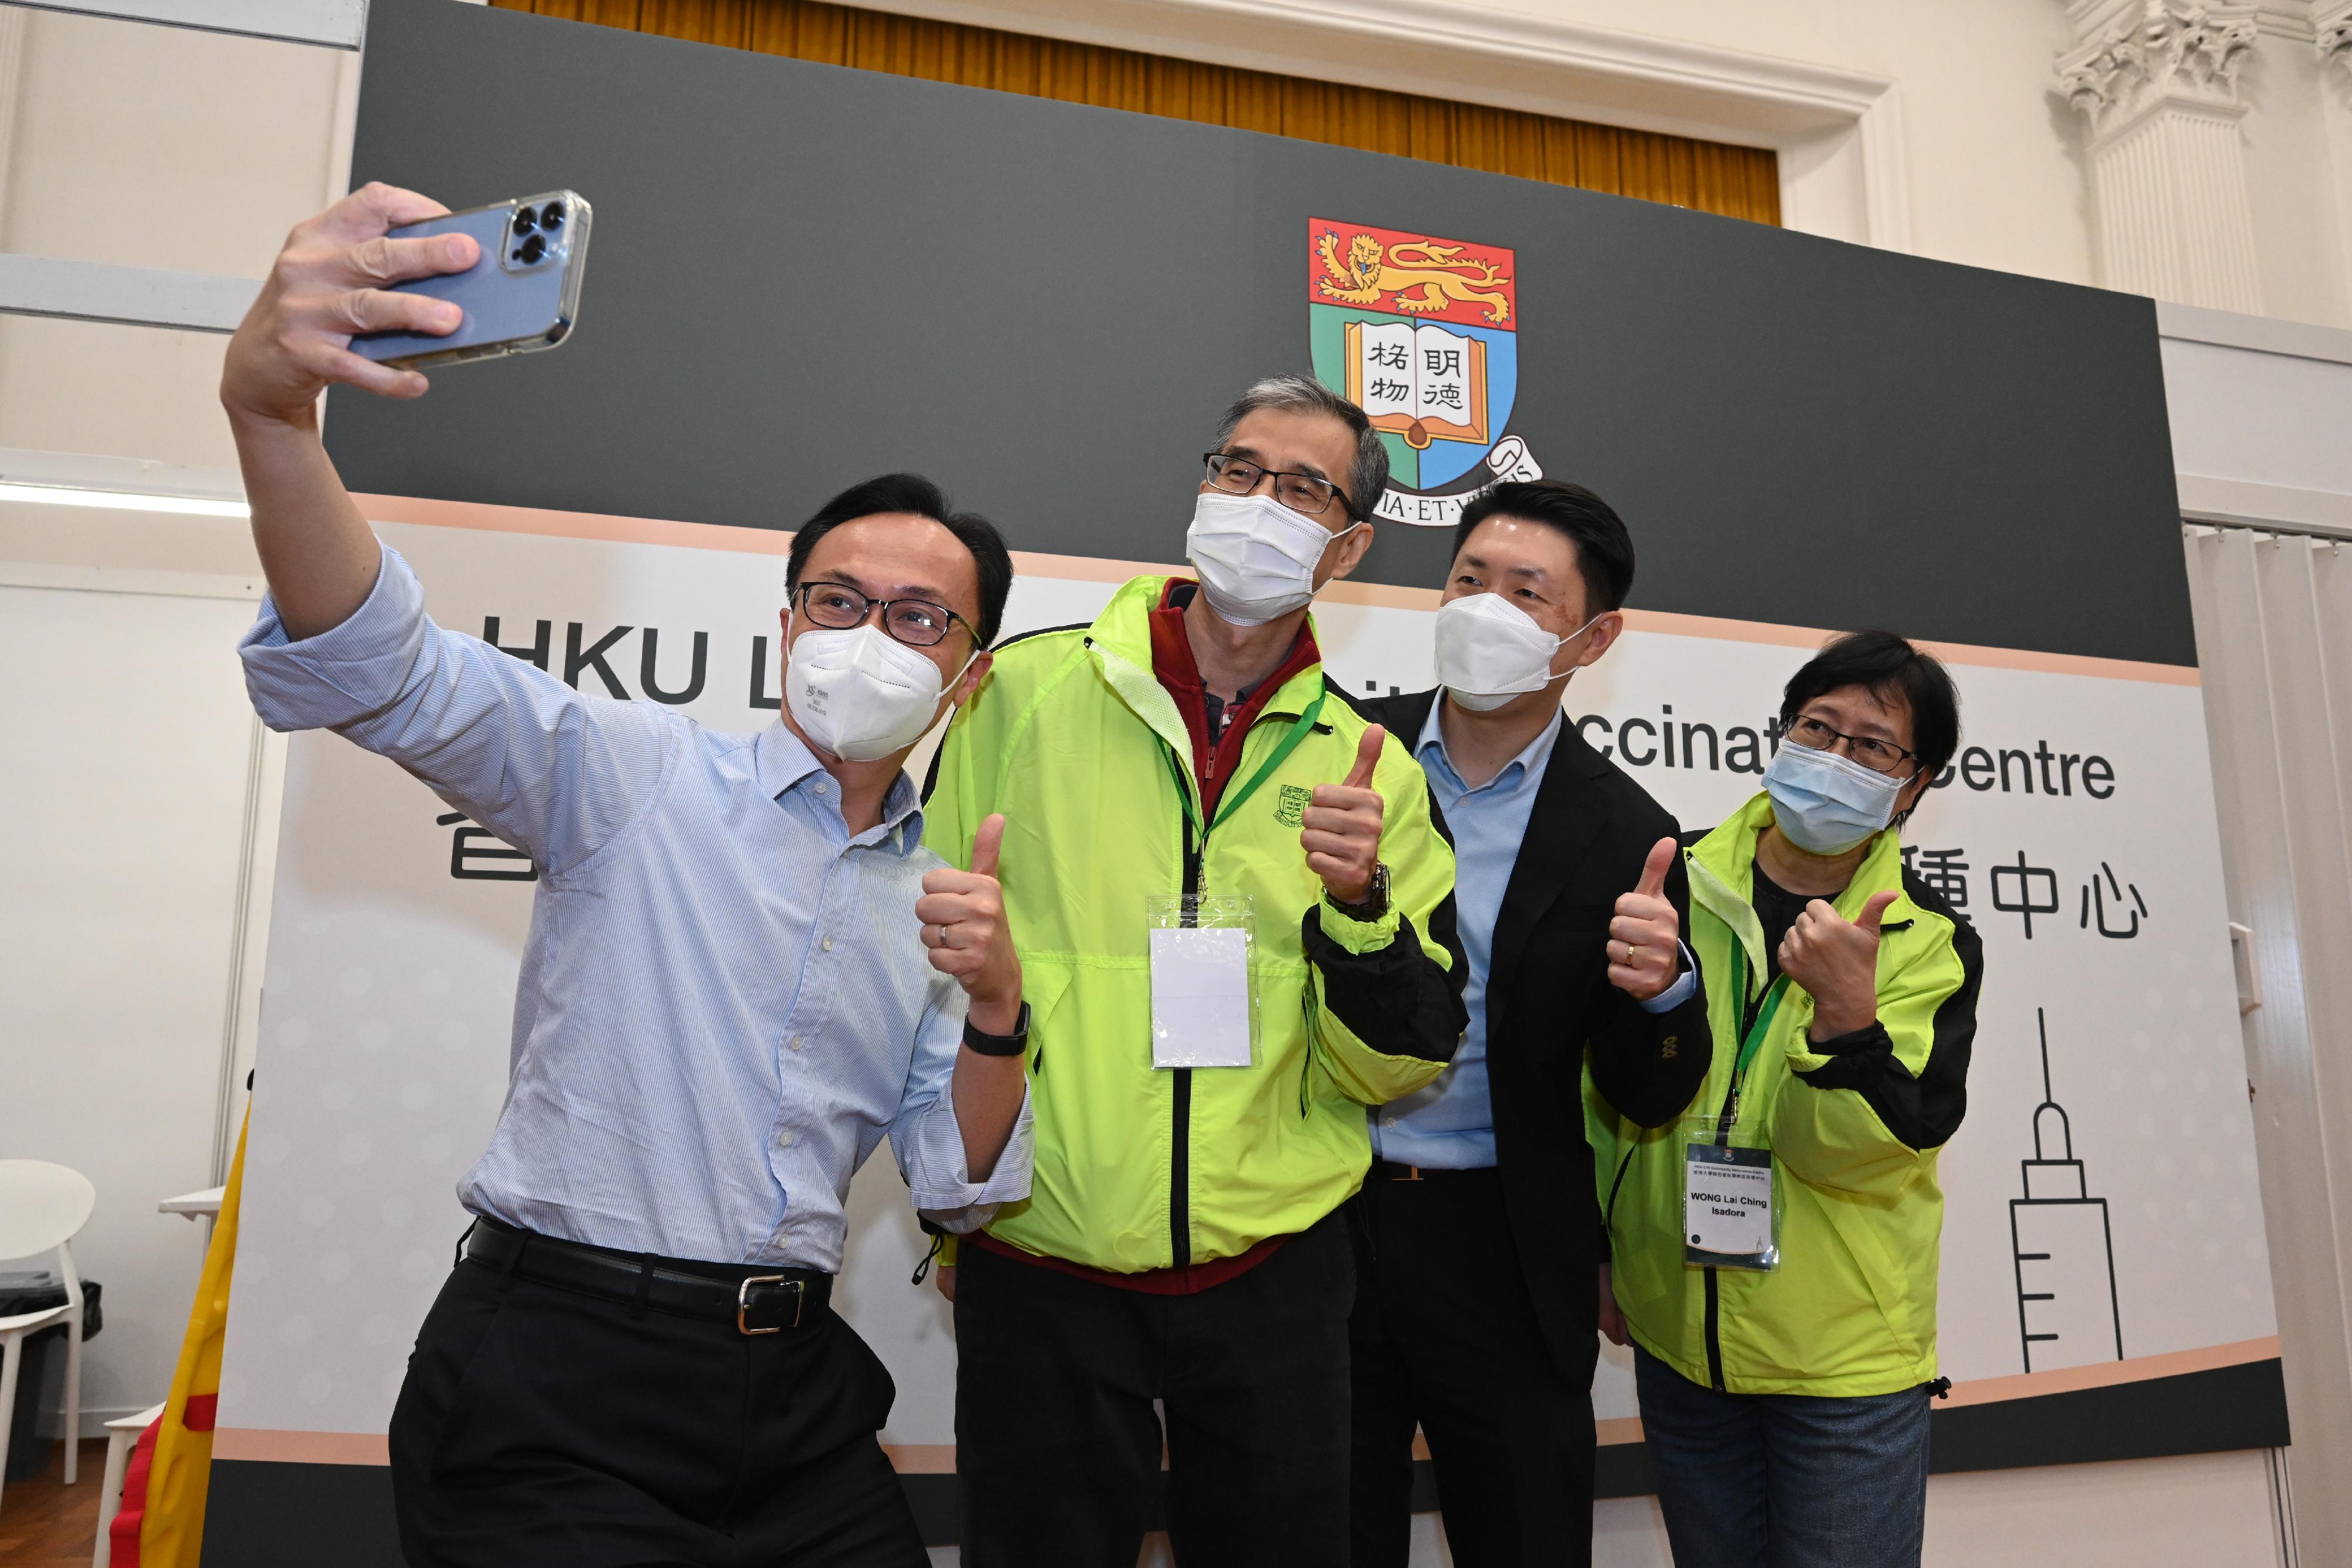 The Secretary for the Civil Service, Mr Patrick Nip, today (May 13) visited the Community Vaccination Centre (CVC) at Loke Yew Hall of the University of Hong Kong (HKU) to inspect its operation and express gratitude to the medical team and administrative support staff. Photo shows Mr Nip (first left); the Doctor-in-charge of the CVC at Loke Yew Hall of HKU, Professor Ivan Hung (second right); and staff of the medical team of the CVC showing support for the COVID-19 Vaccination Programme.